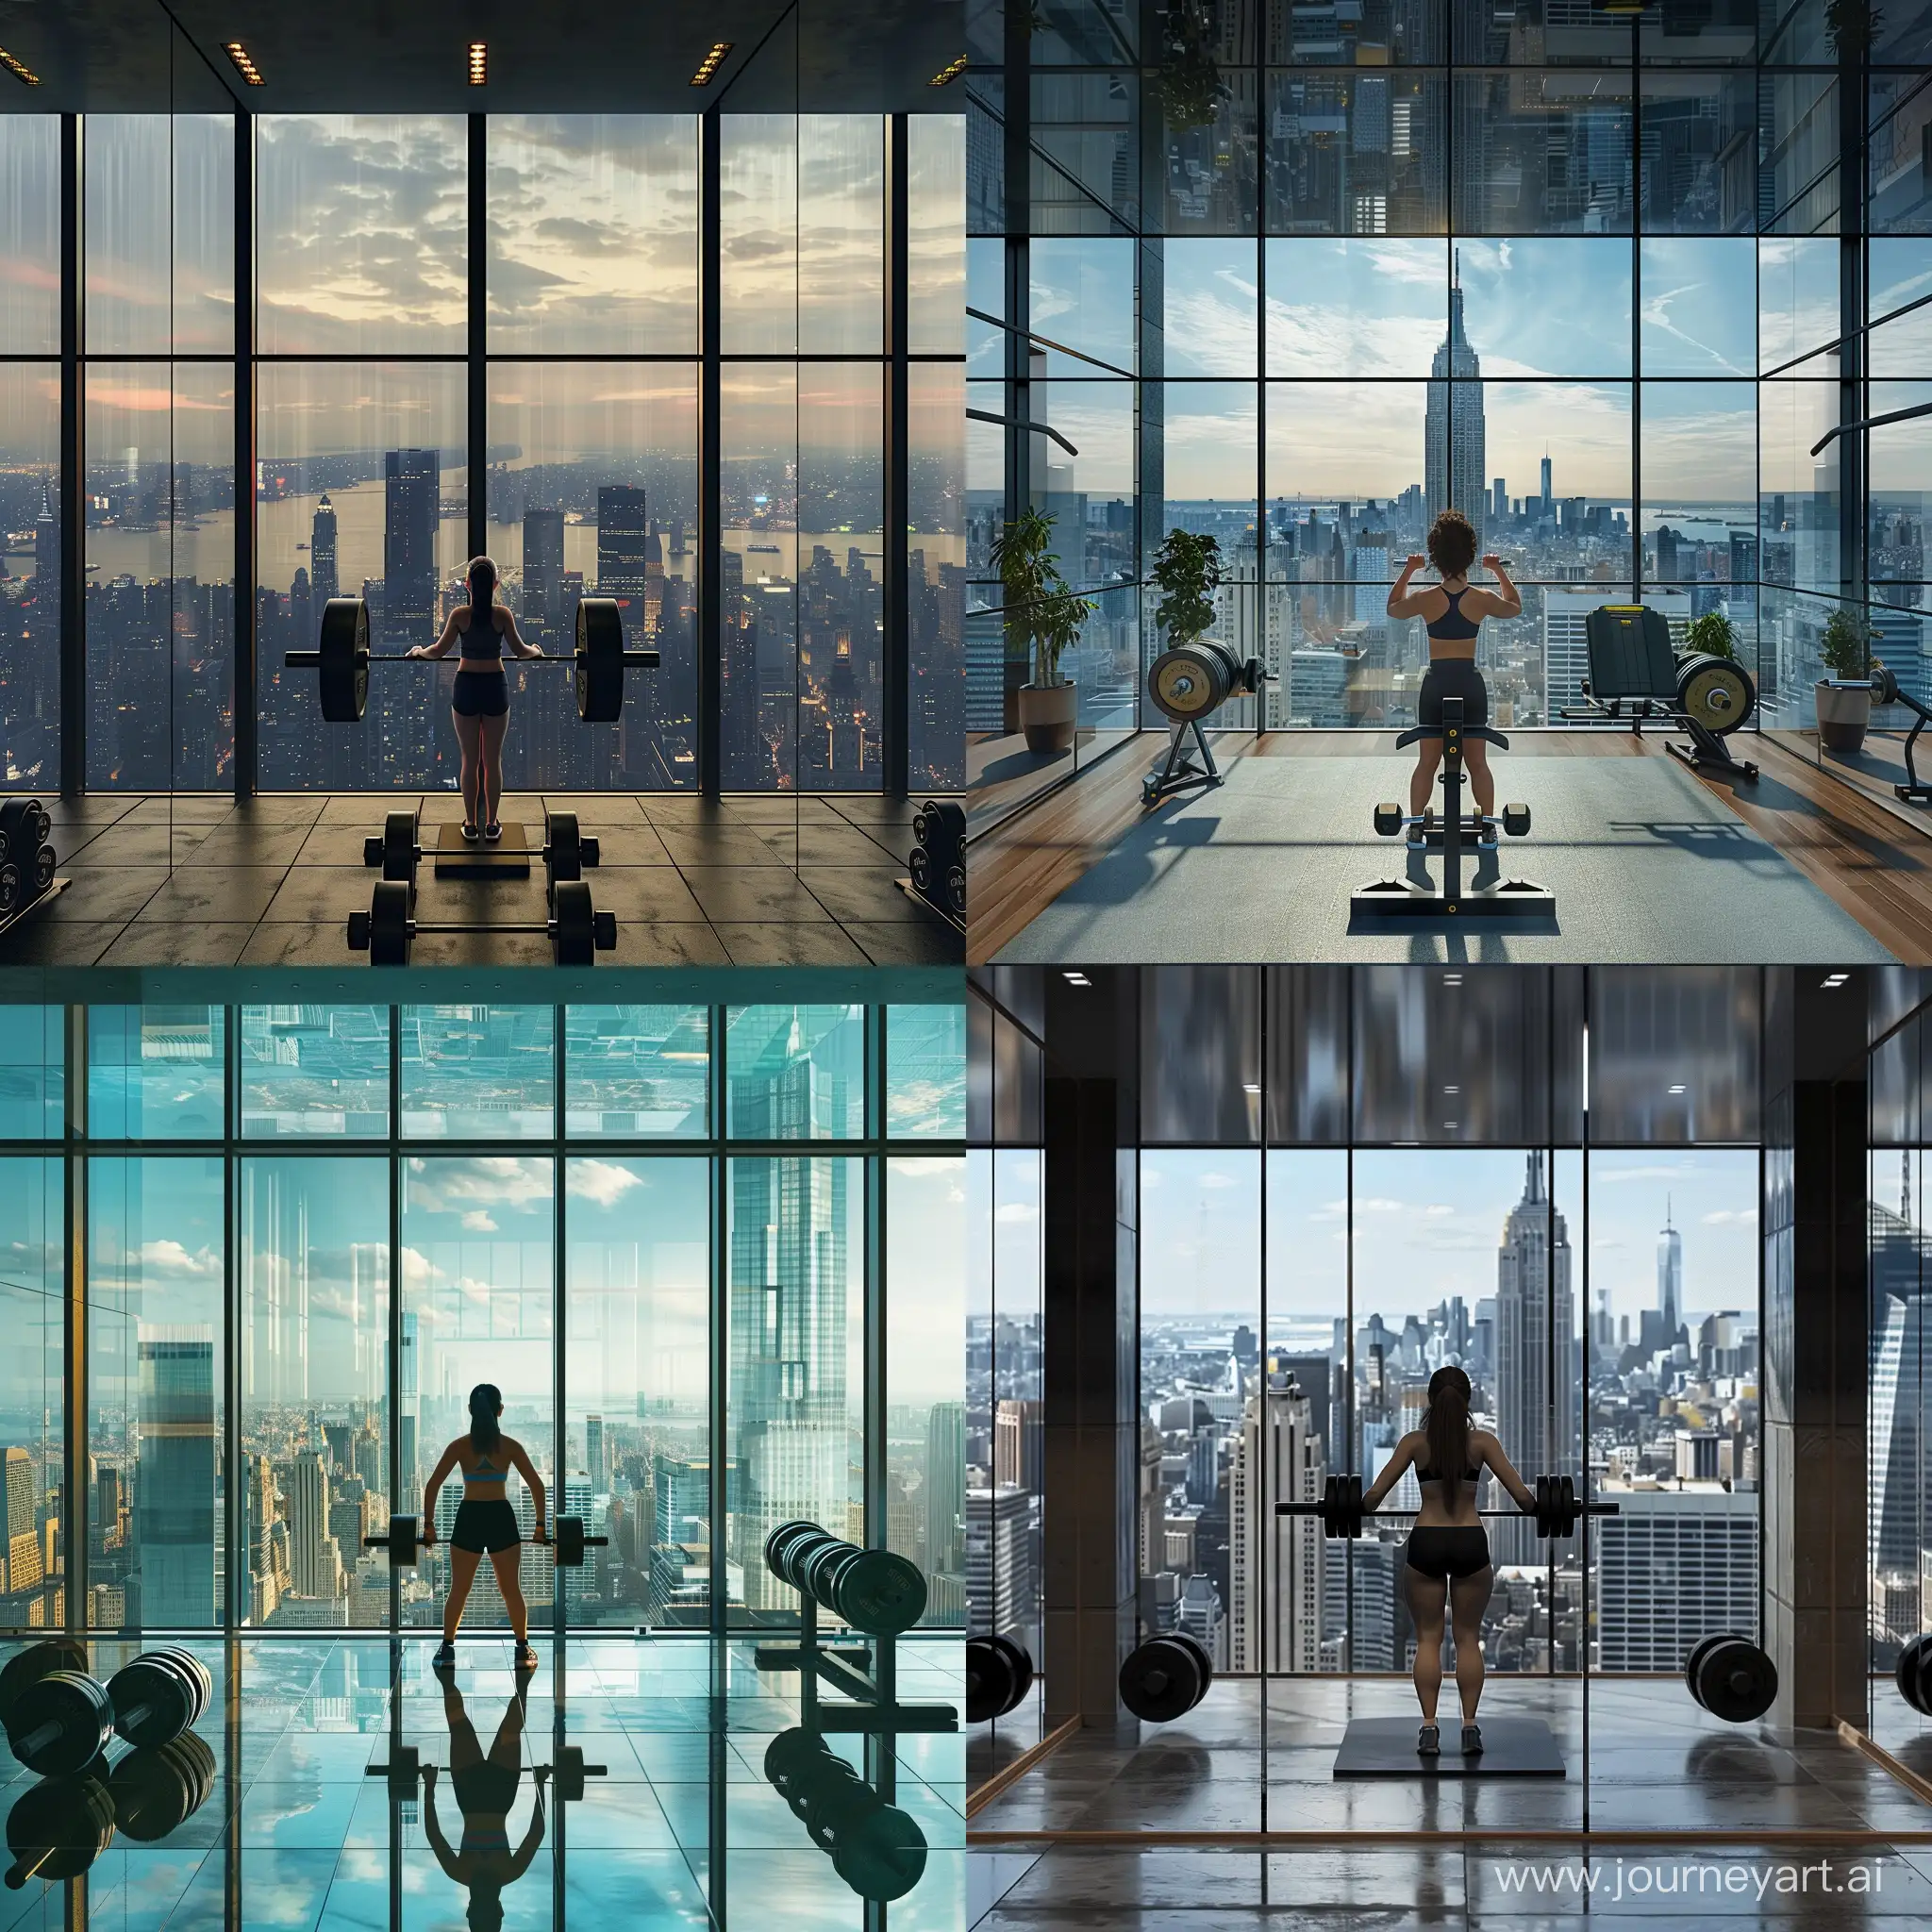 A girl lifts weights in a sleek, modern gym with panoramic views of the city